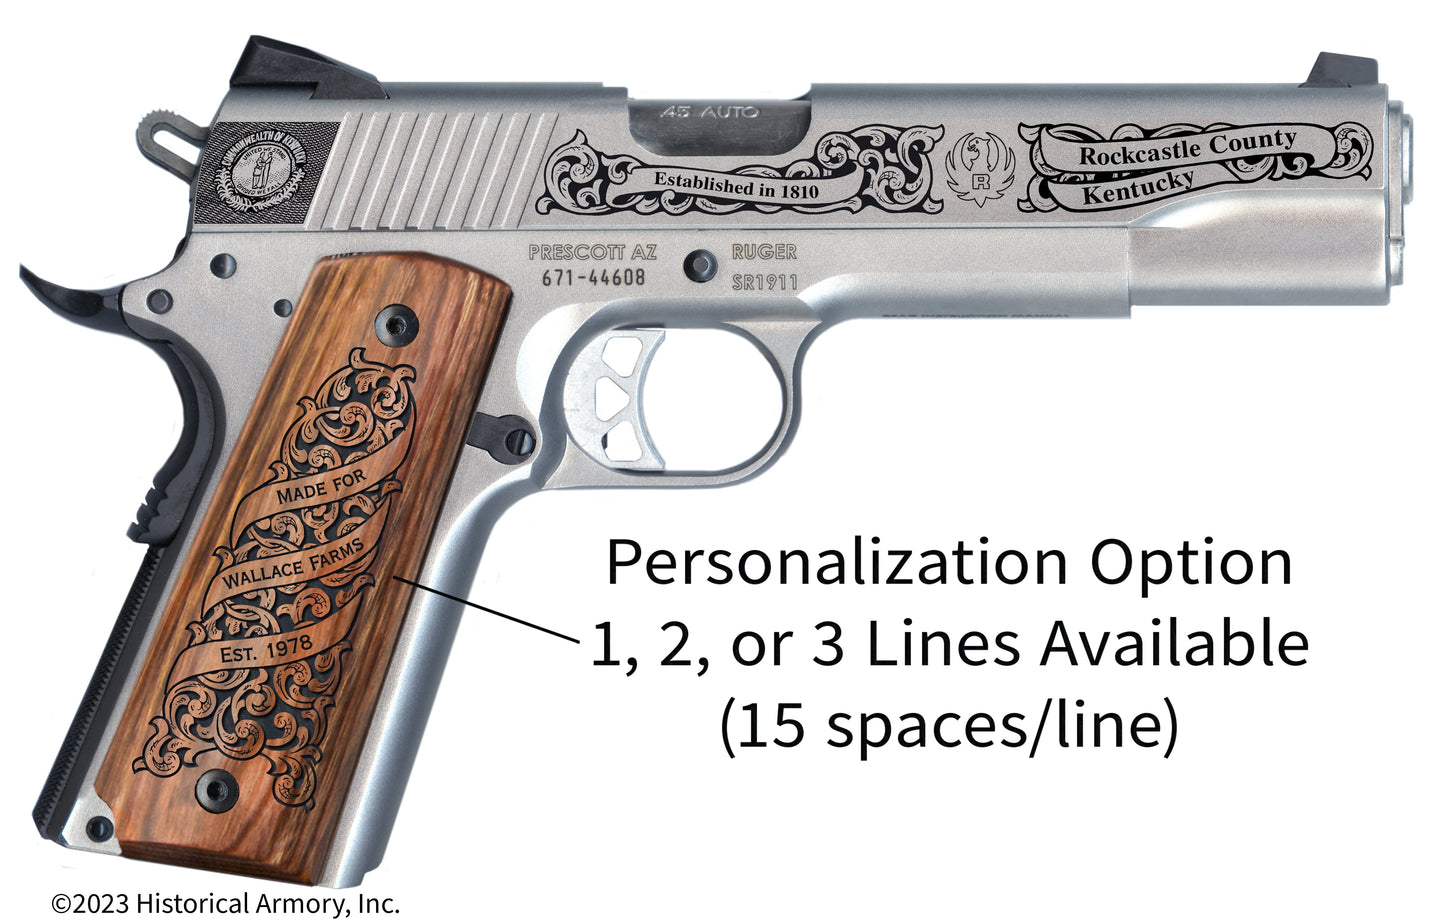 Rockcastle County Kentucky Personalized Engraved .45 Auto Ruger 1911